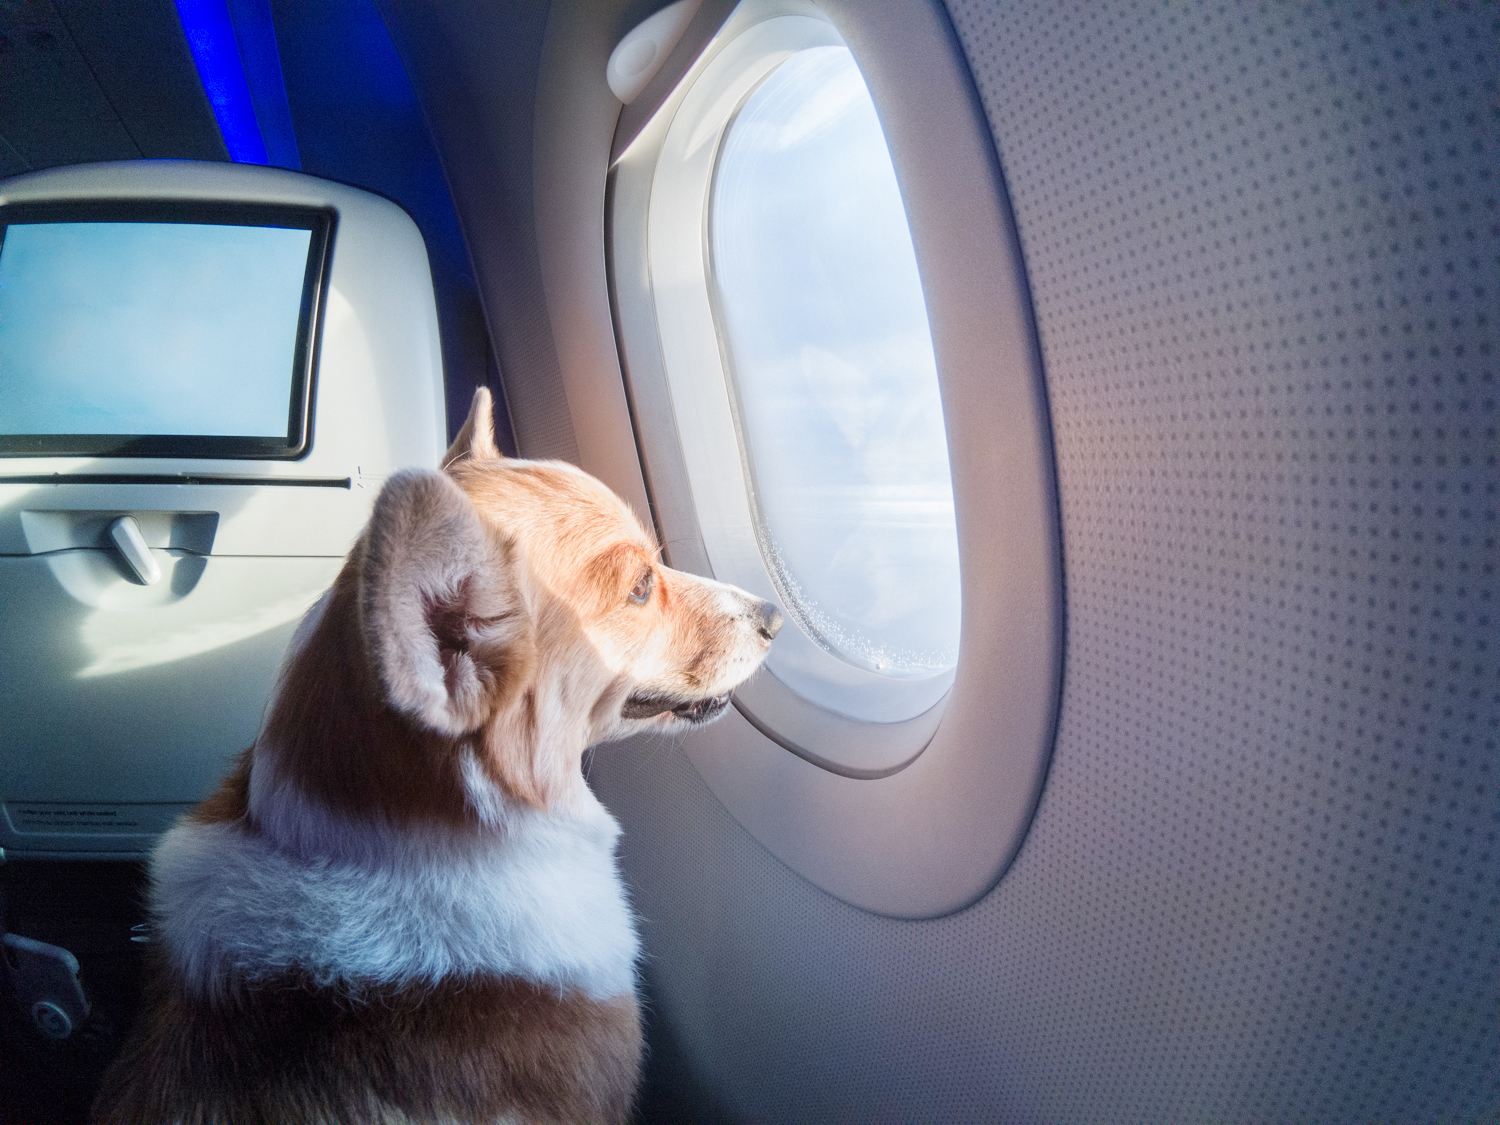 Bark Air Launches Exclusive Airline Service for Dogs, Turning First Flights Into Pet Adventures